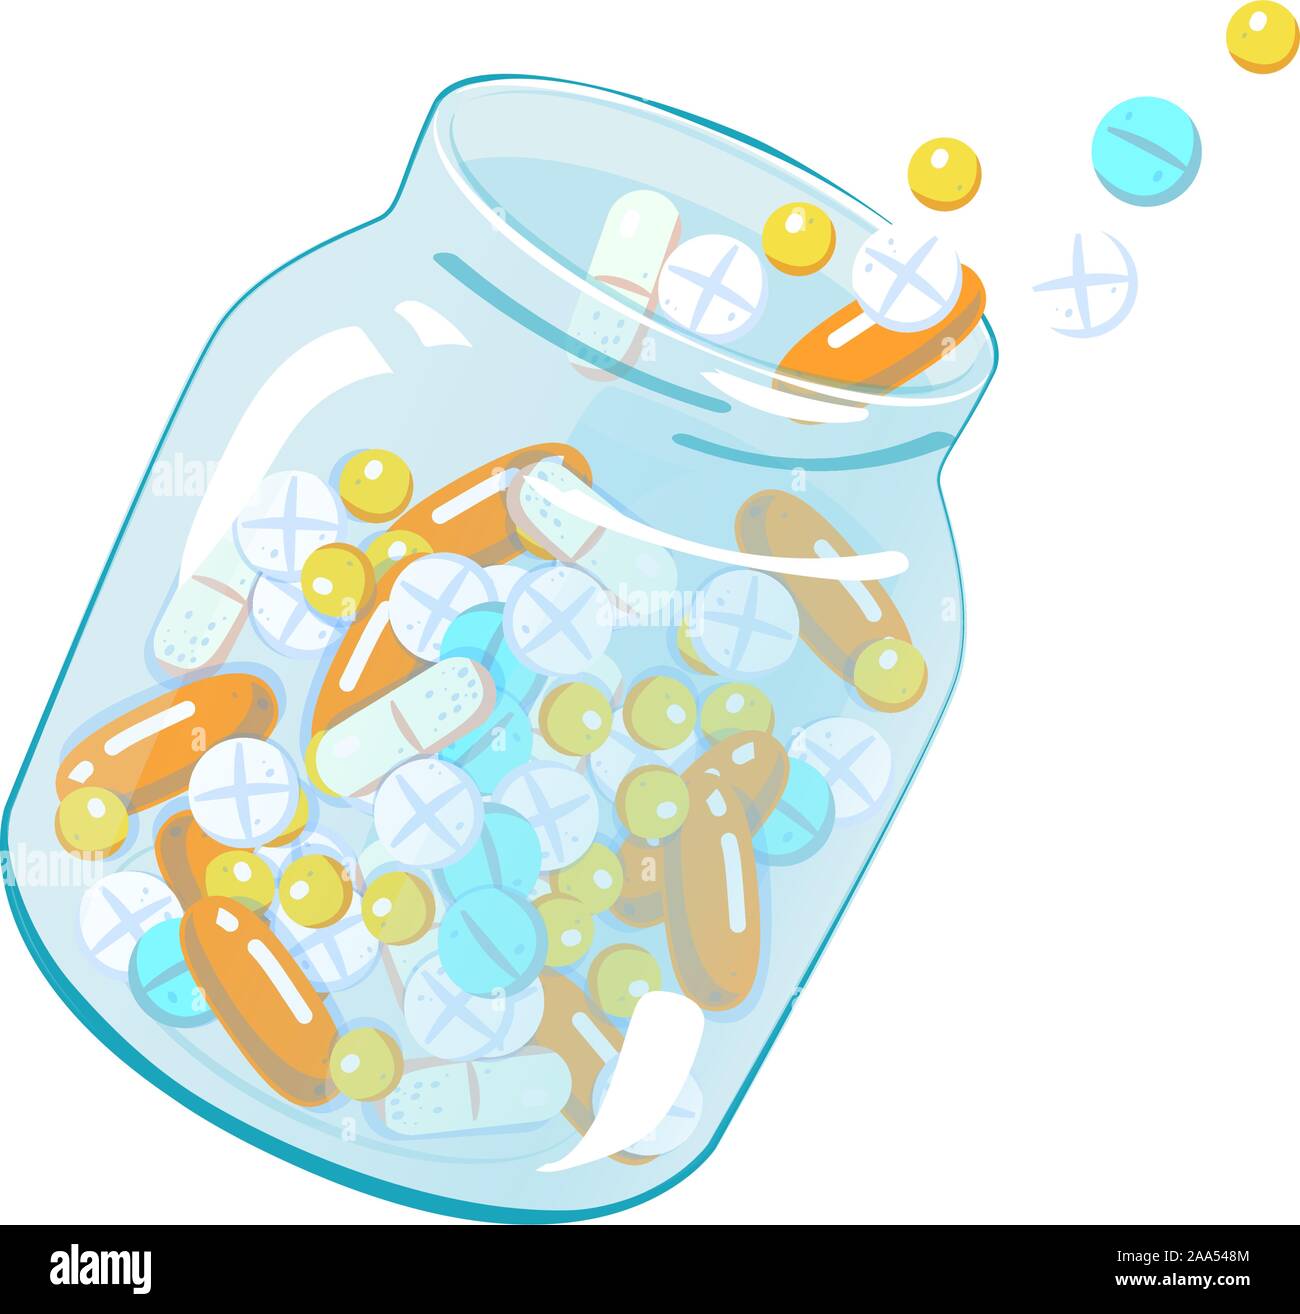 Open jar with tablets levitate. Illustration for medical design. Realistic Medicine bottle icon, pill, pharmacy drug, health care concept. Vitamin tablet box. Vector flat Isolated on white background. Stock Vector